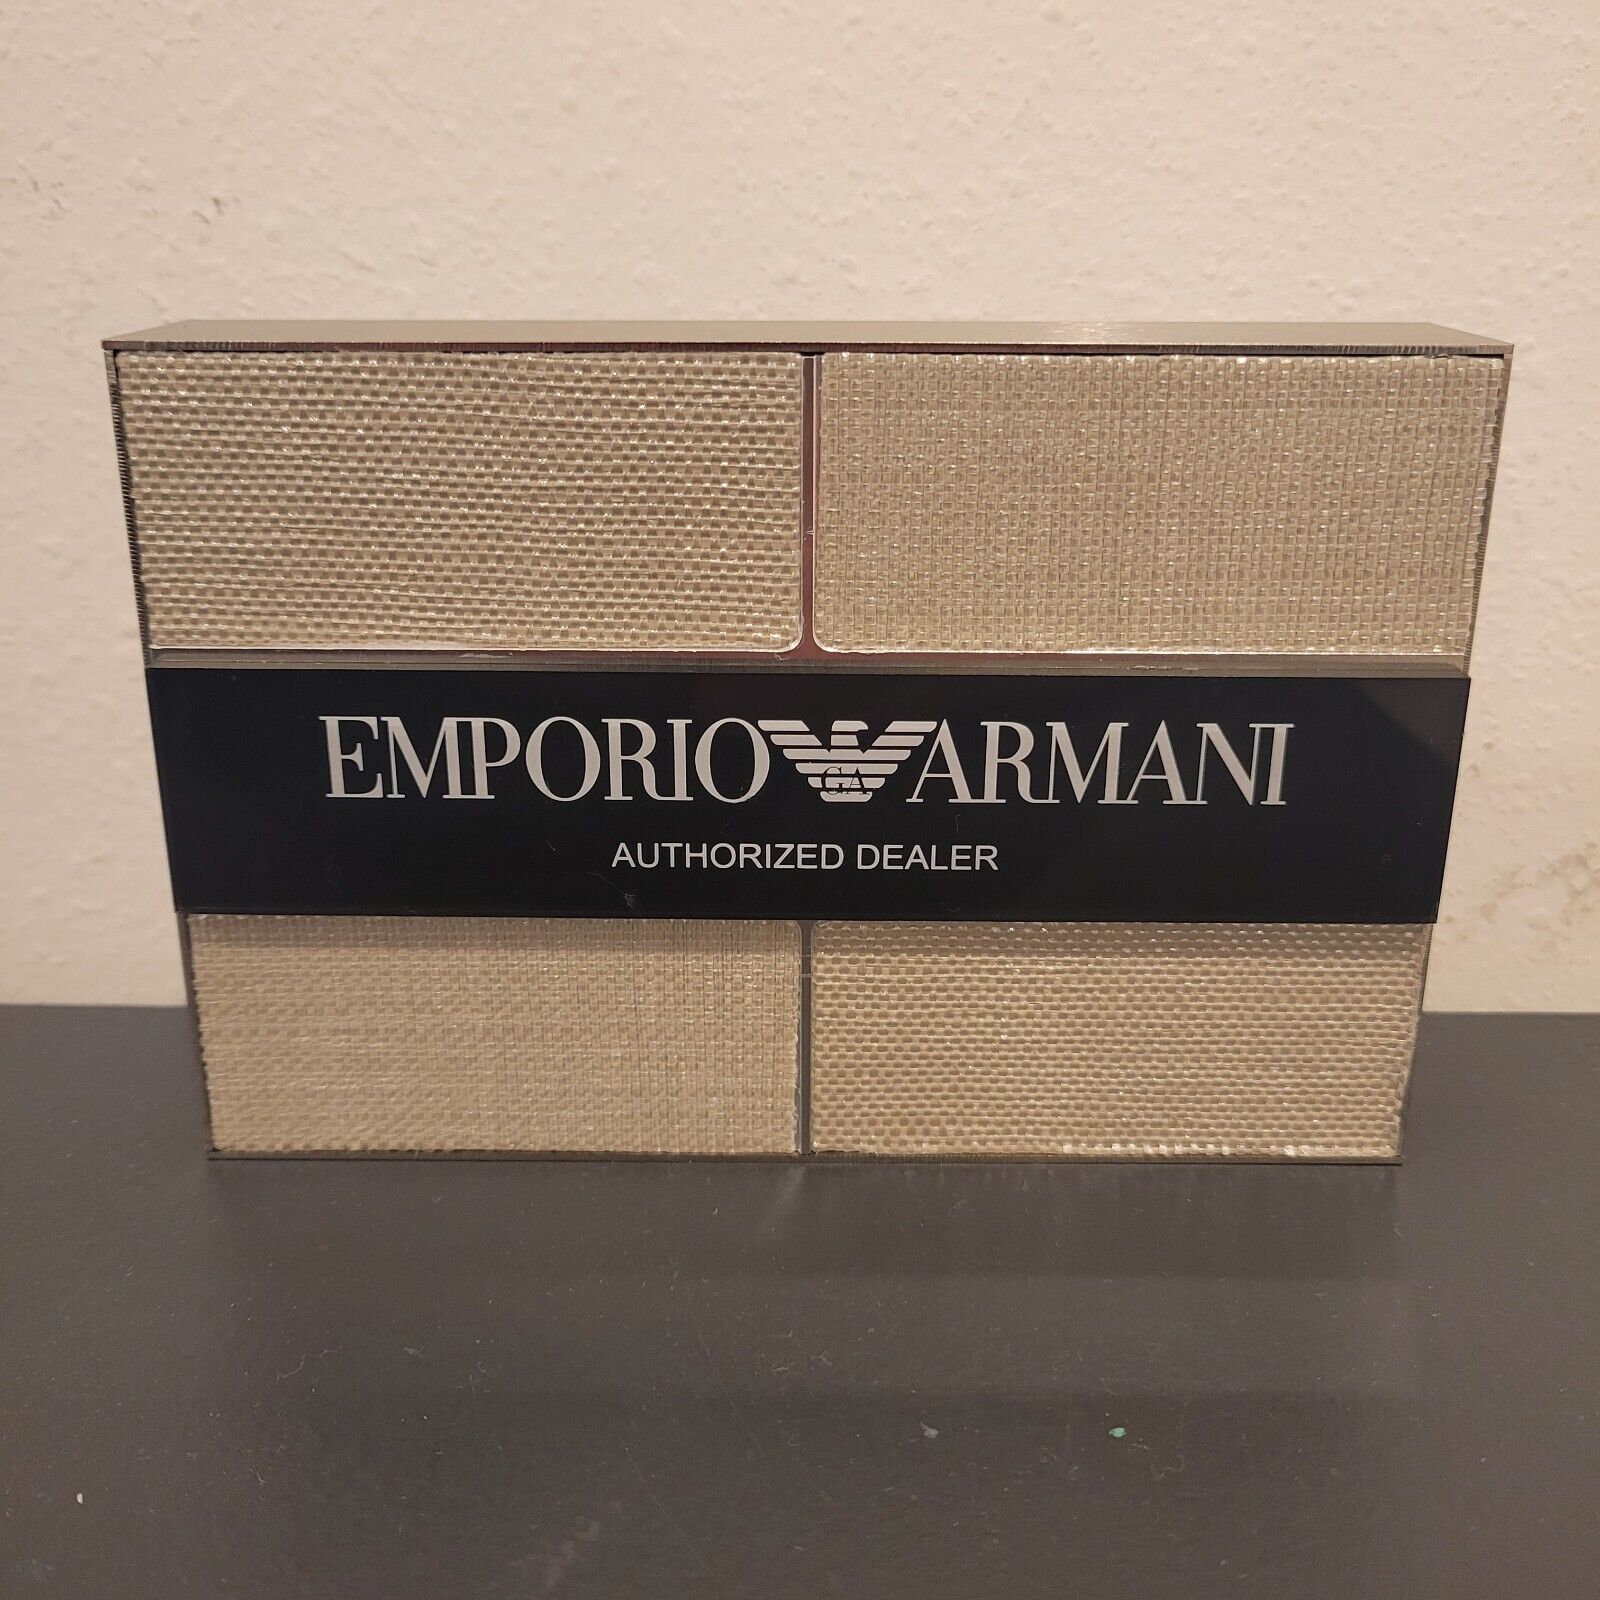 Emporio Armani  Display Sign Paper Weight / Eyeglasses / Accessories / Optical